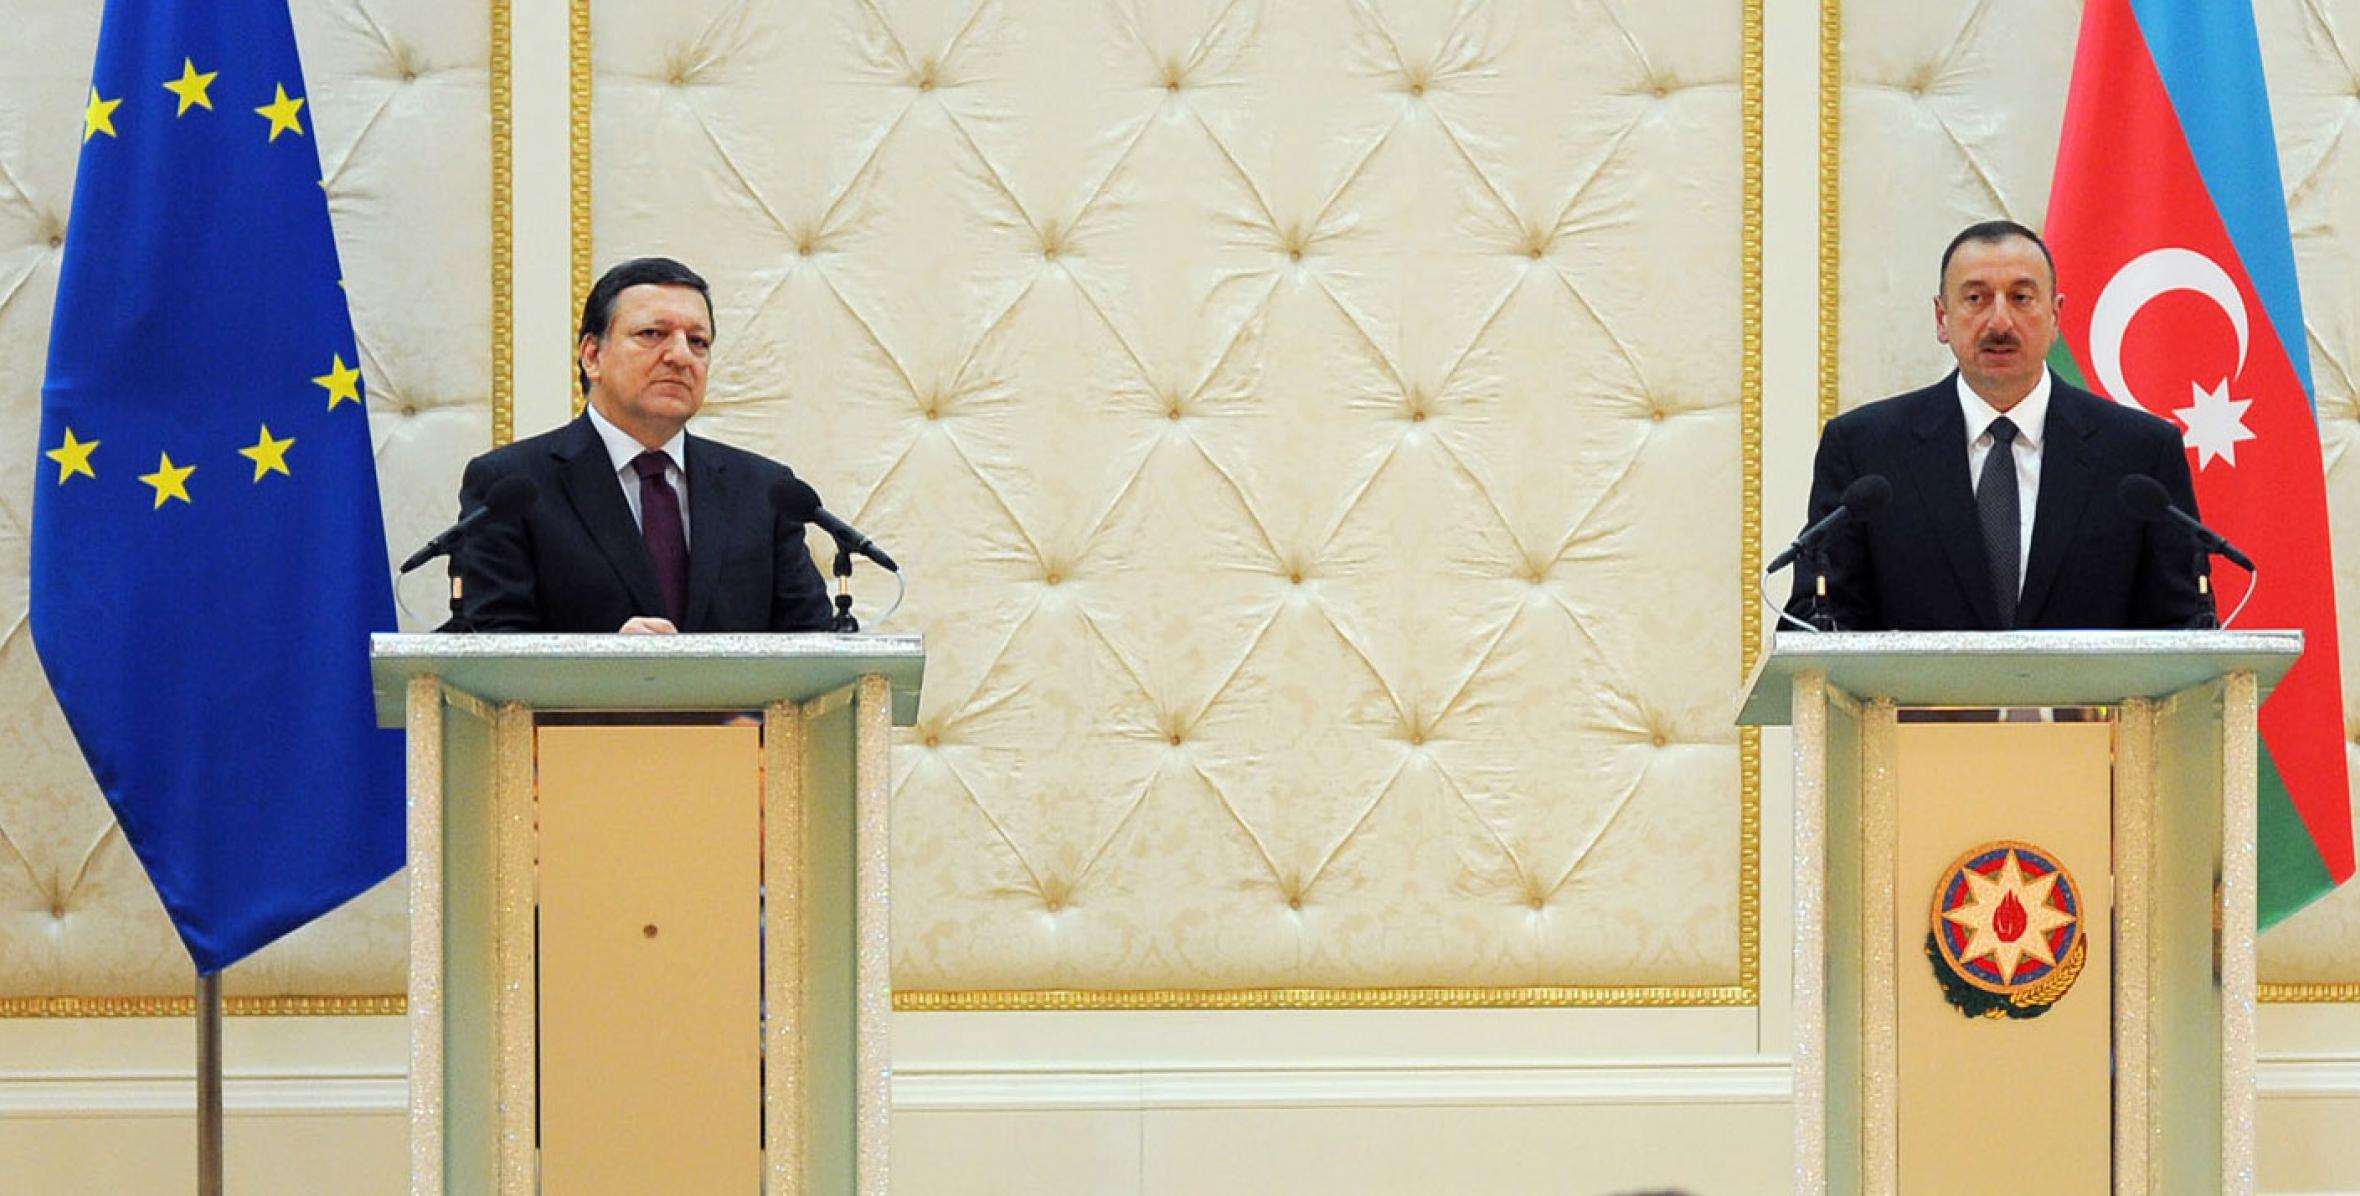 Ilham Aliyev and President of the European Commission José Manuel Barroso held a press conference